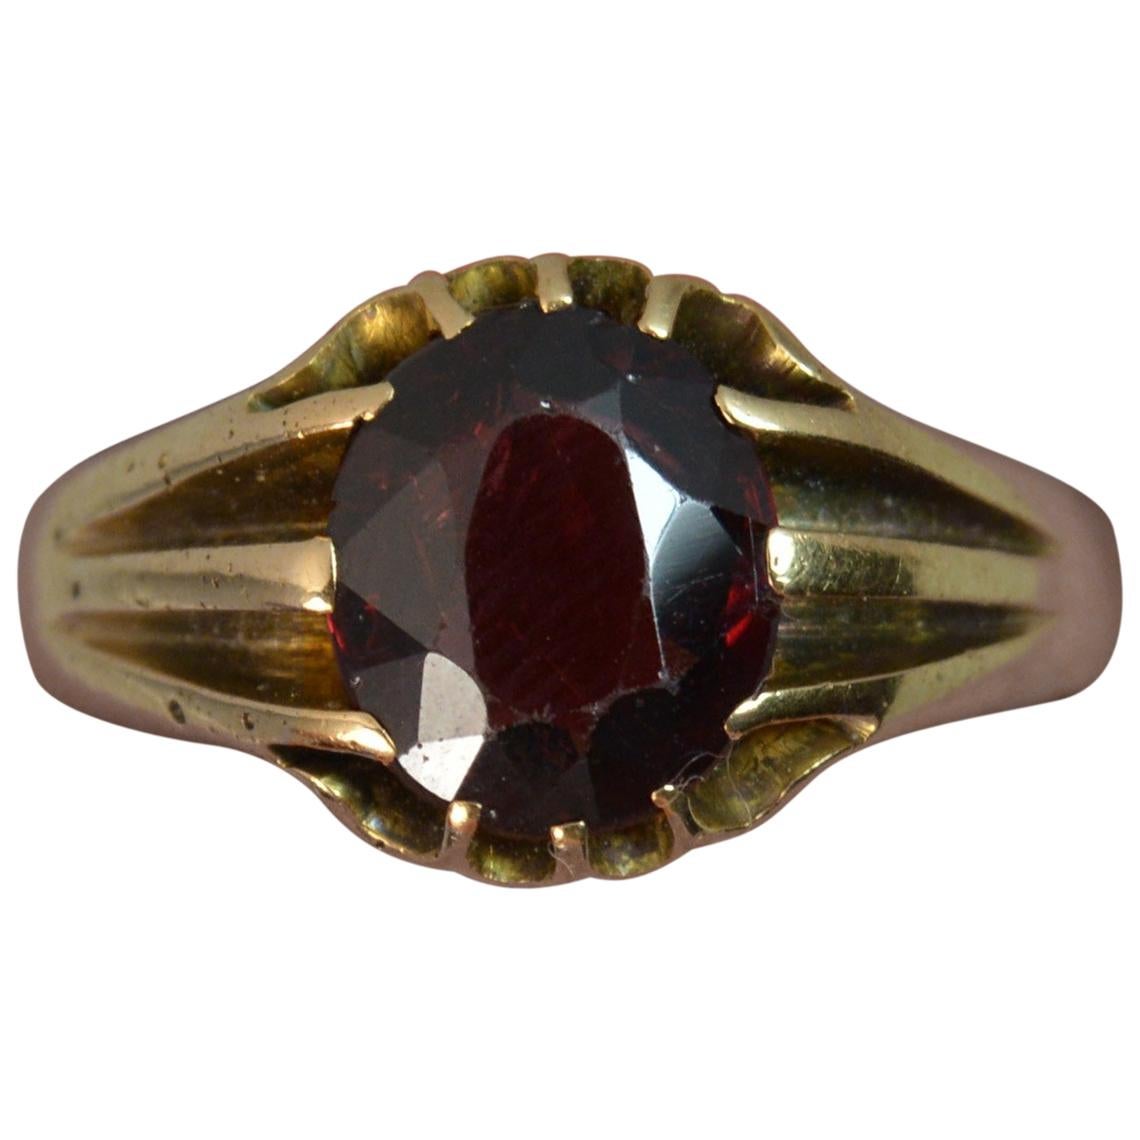 Victorian 18 Carat Gold and Garnet Solitaire Gypsy Ring